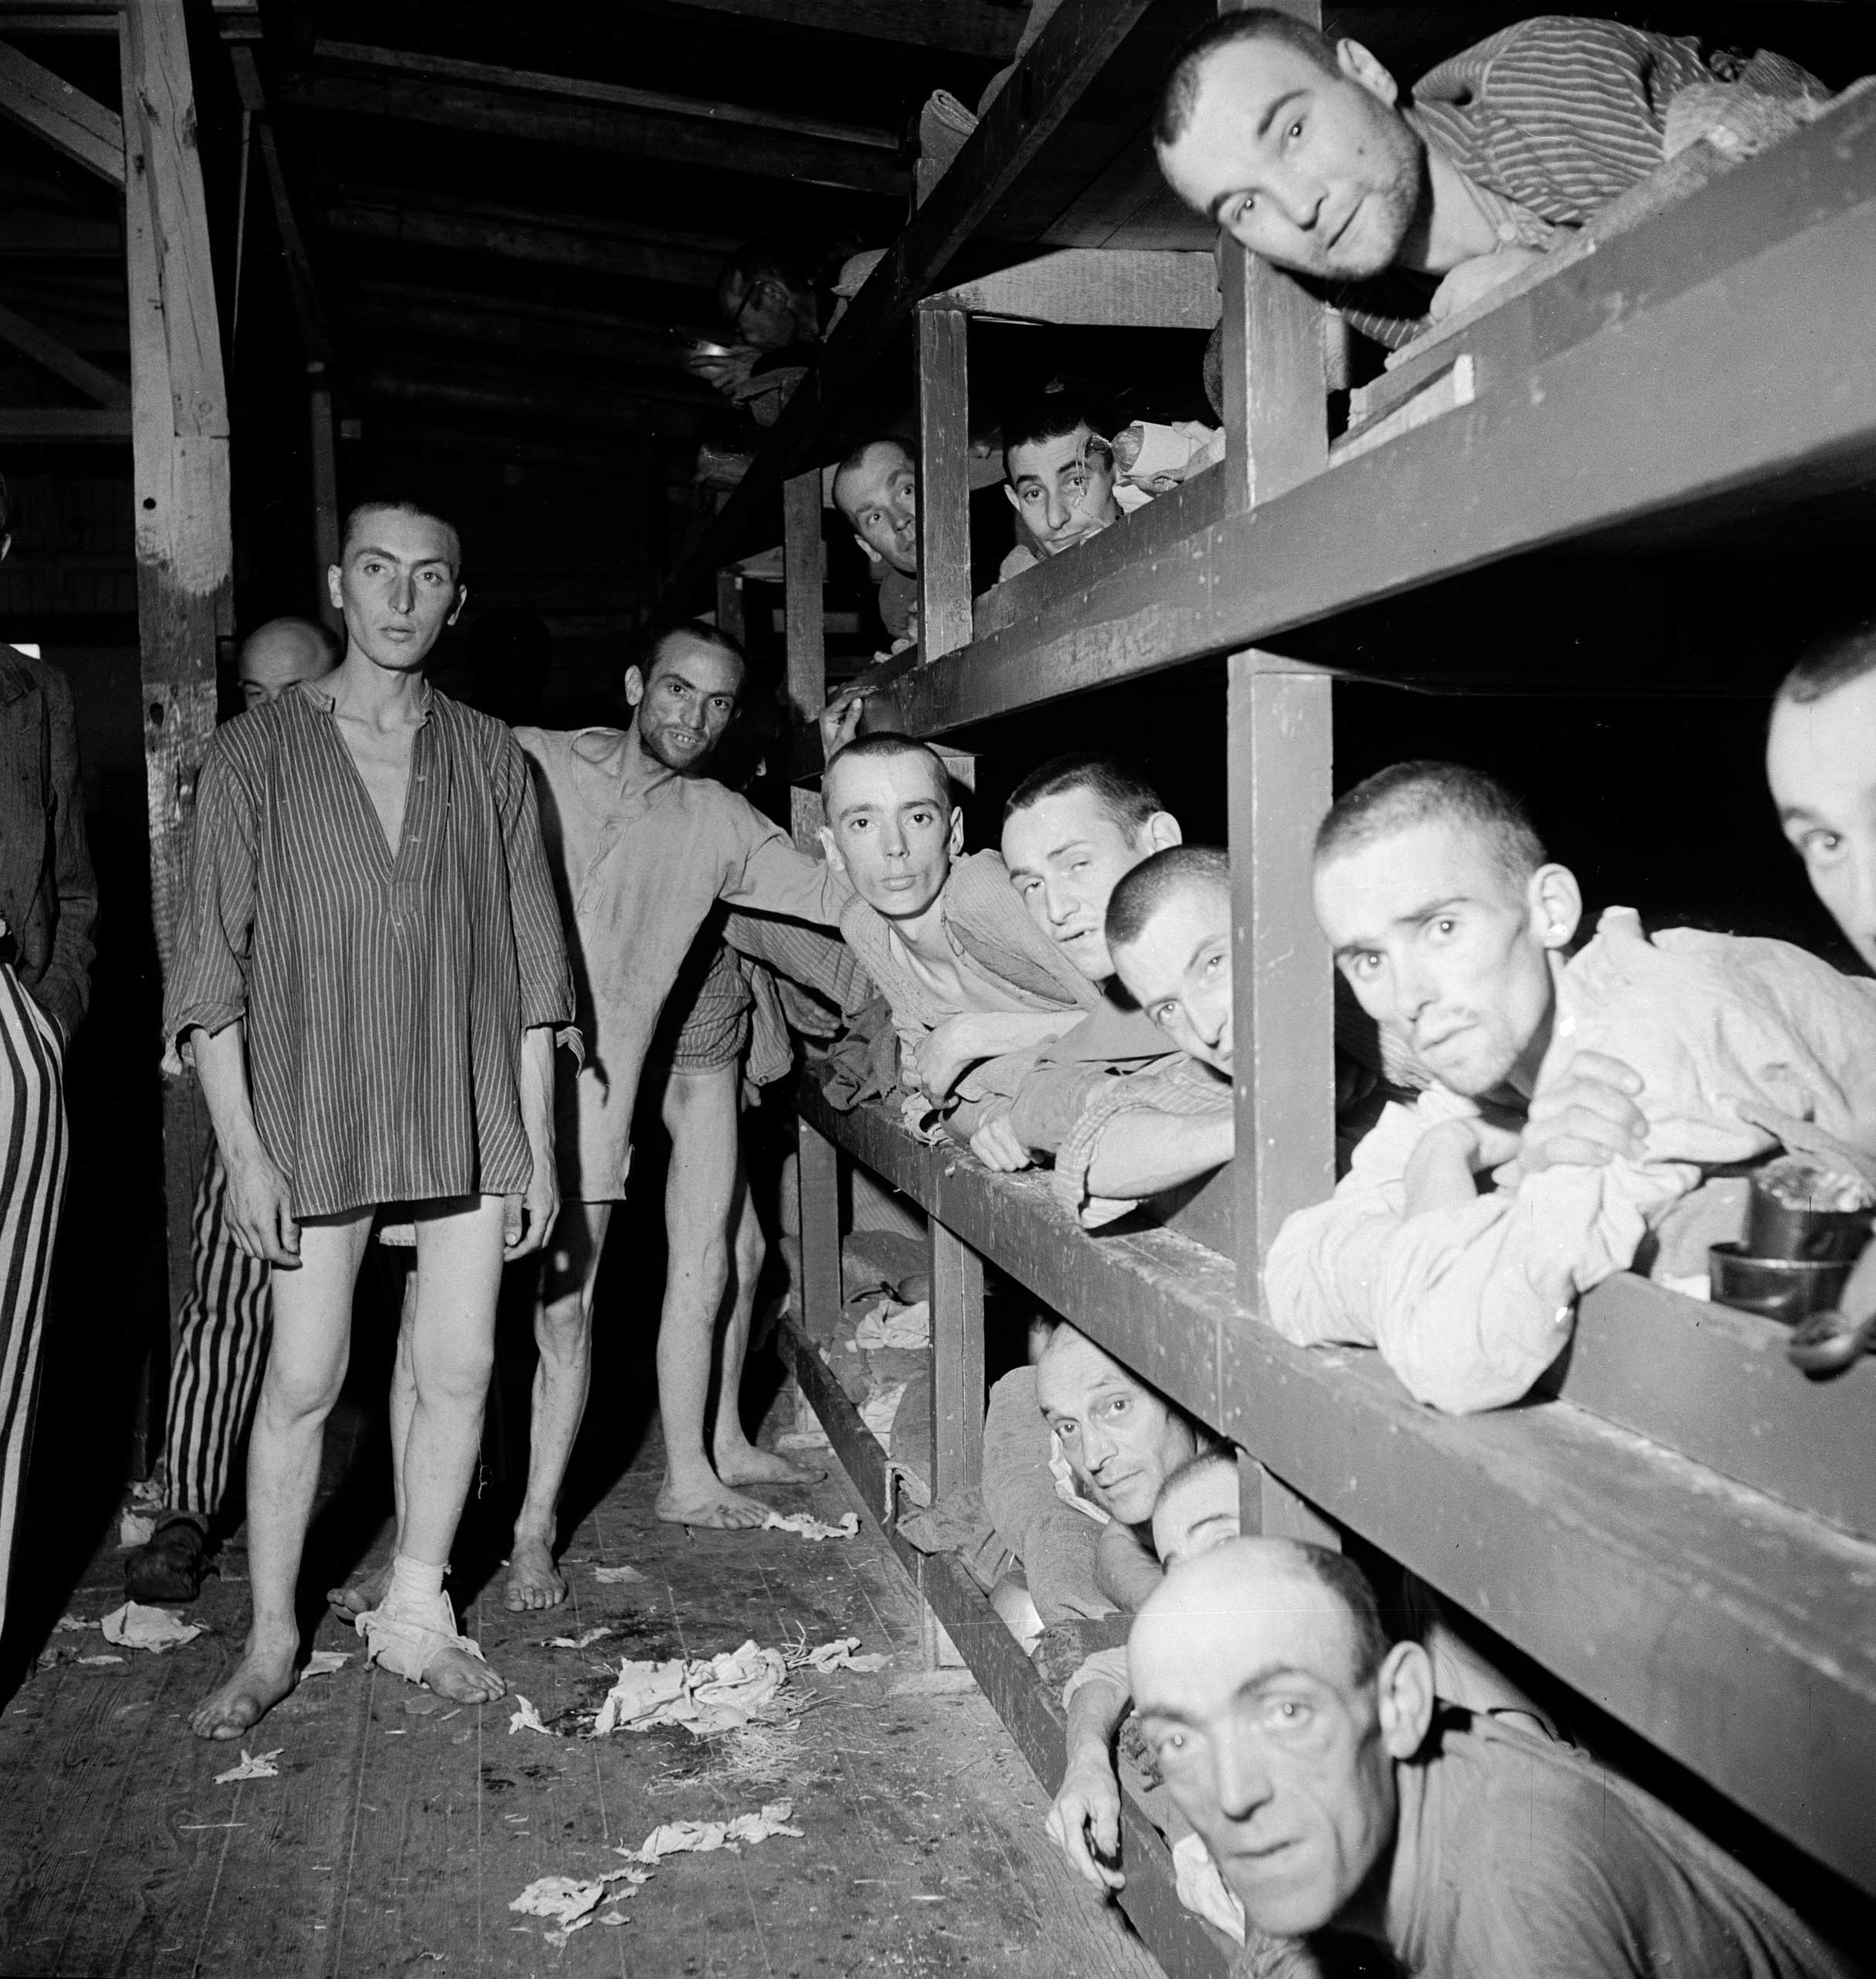 Not published in LIFE. Prisoners at Buchenwald during the camp's liberation by American forces, April 1945.